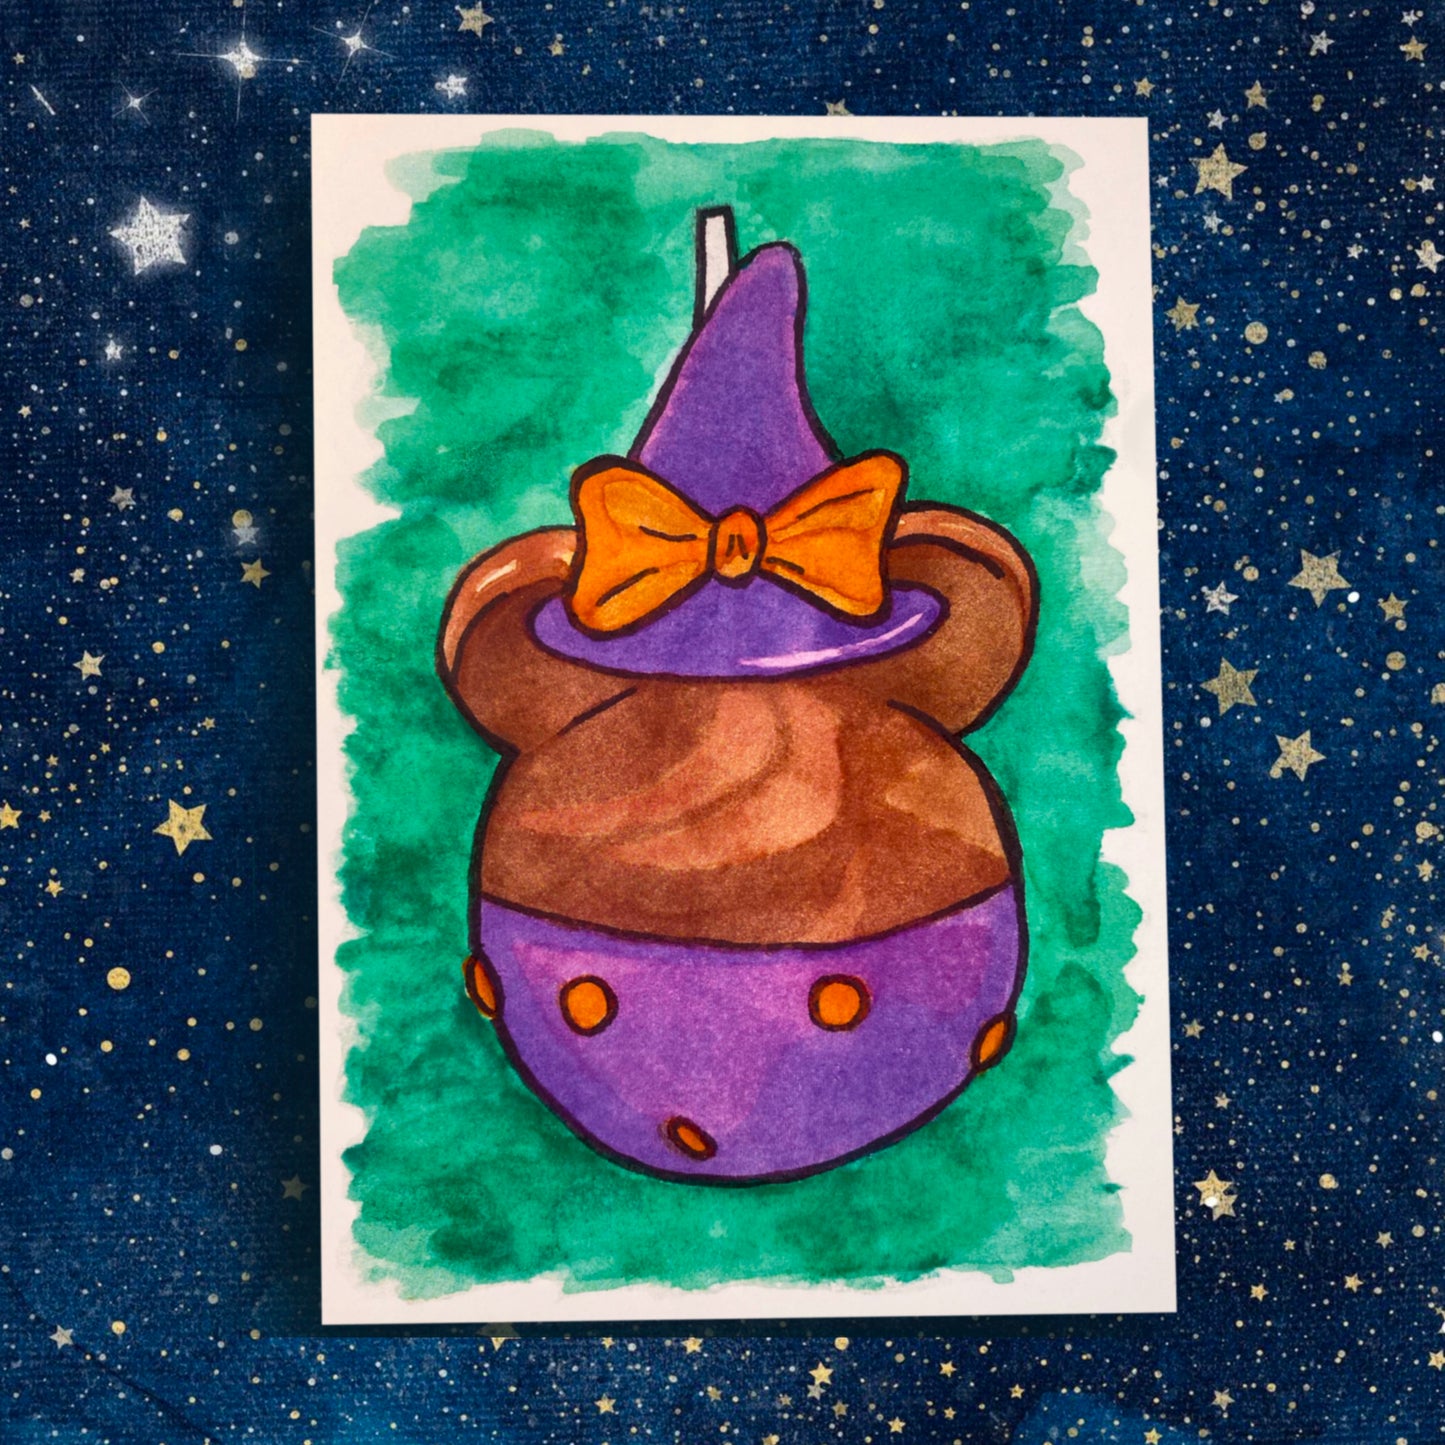 Witchy Mouse Halloween Costume Dessert Food Illustration - The Happiest Caramel Apples on Earth